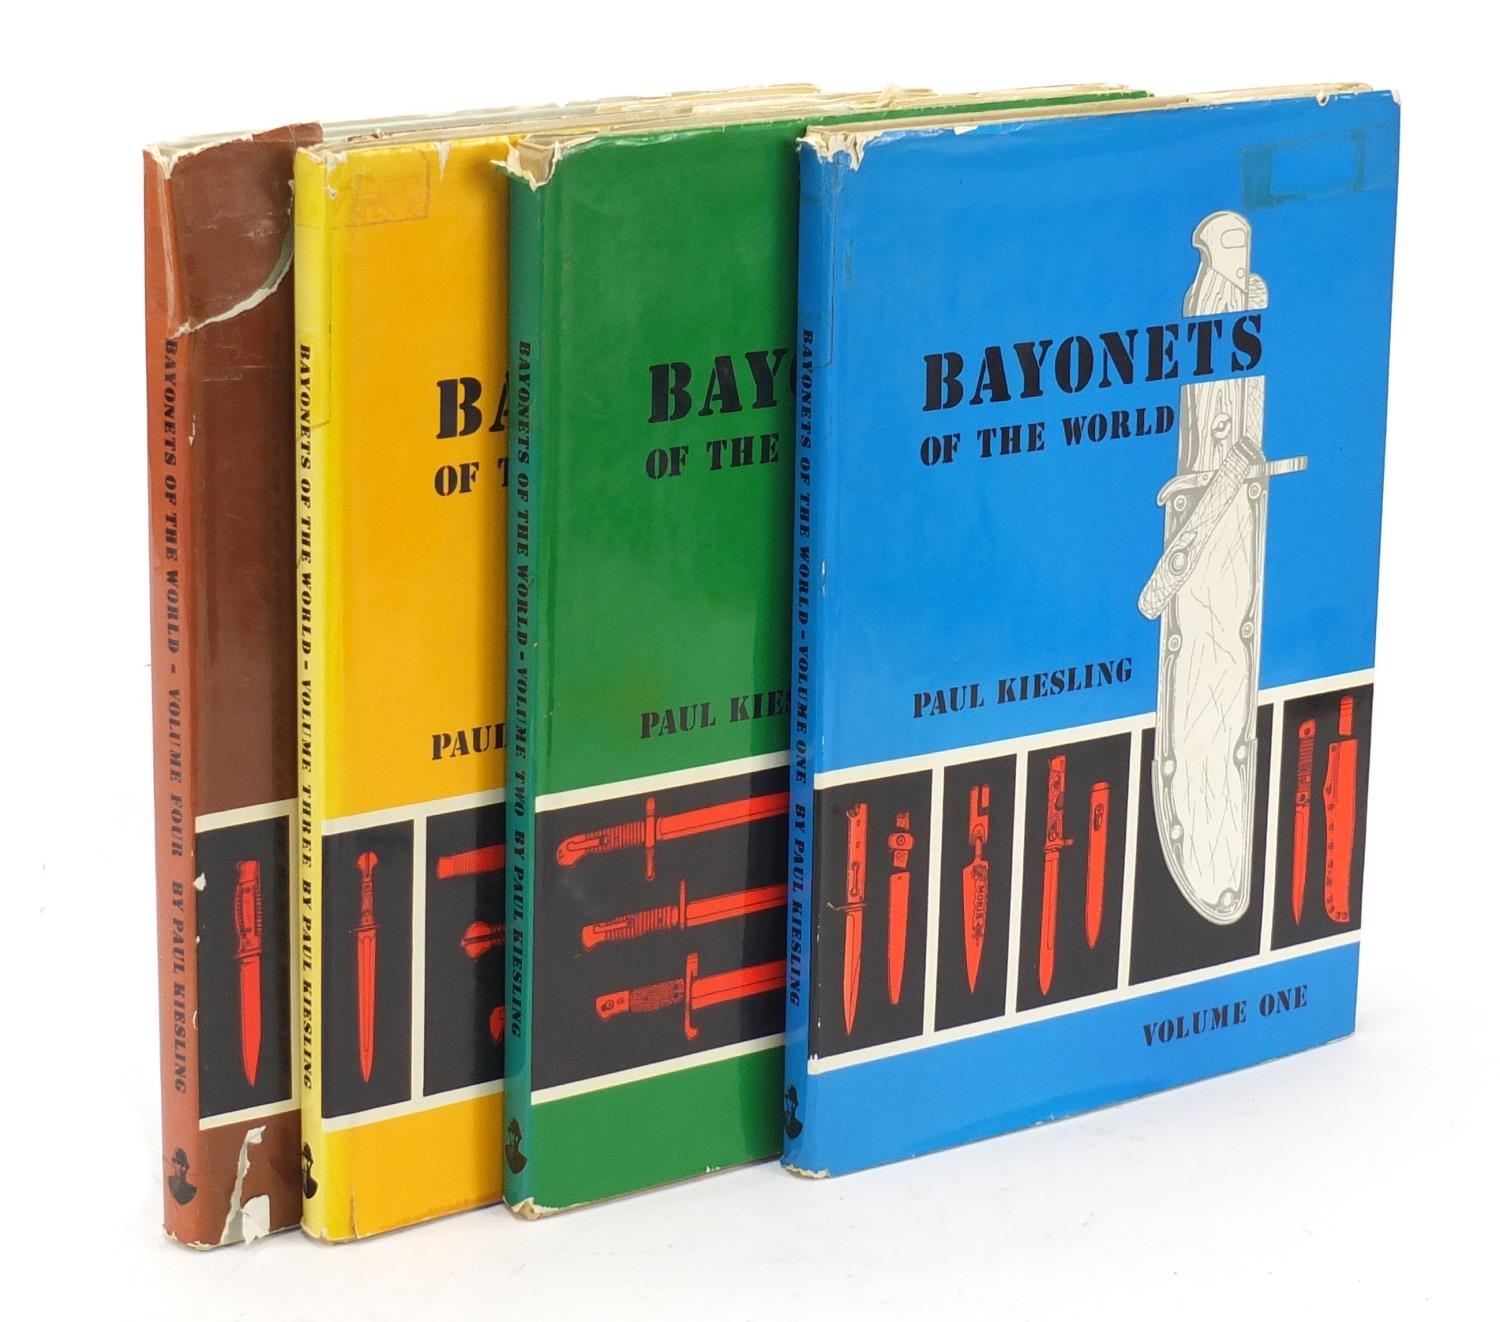 Bayonets of the World by Paul Kiesling, four hardback books with dust covers, volumes I, 2, 3 and 4